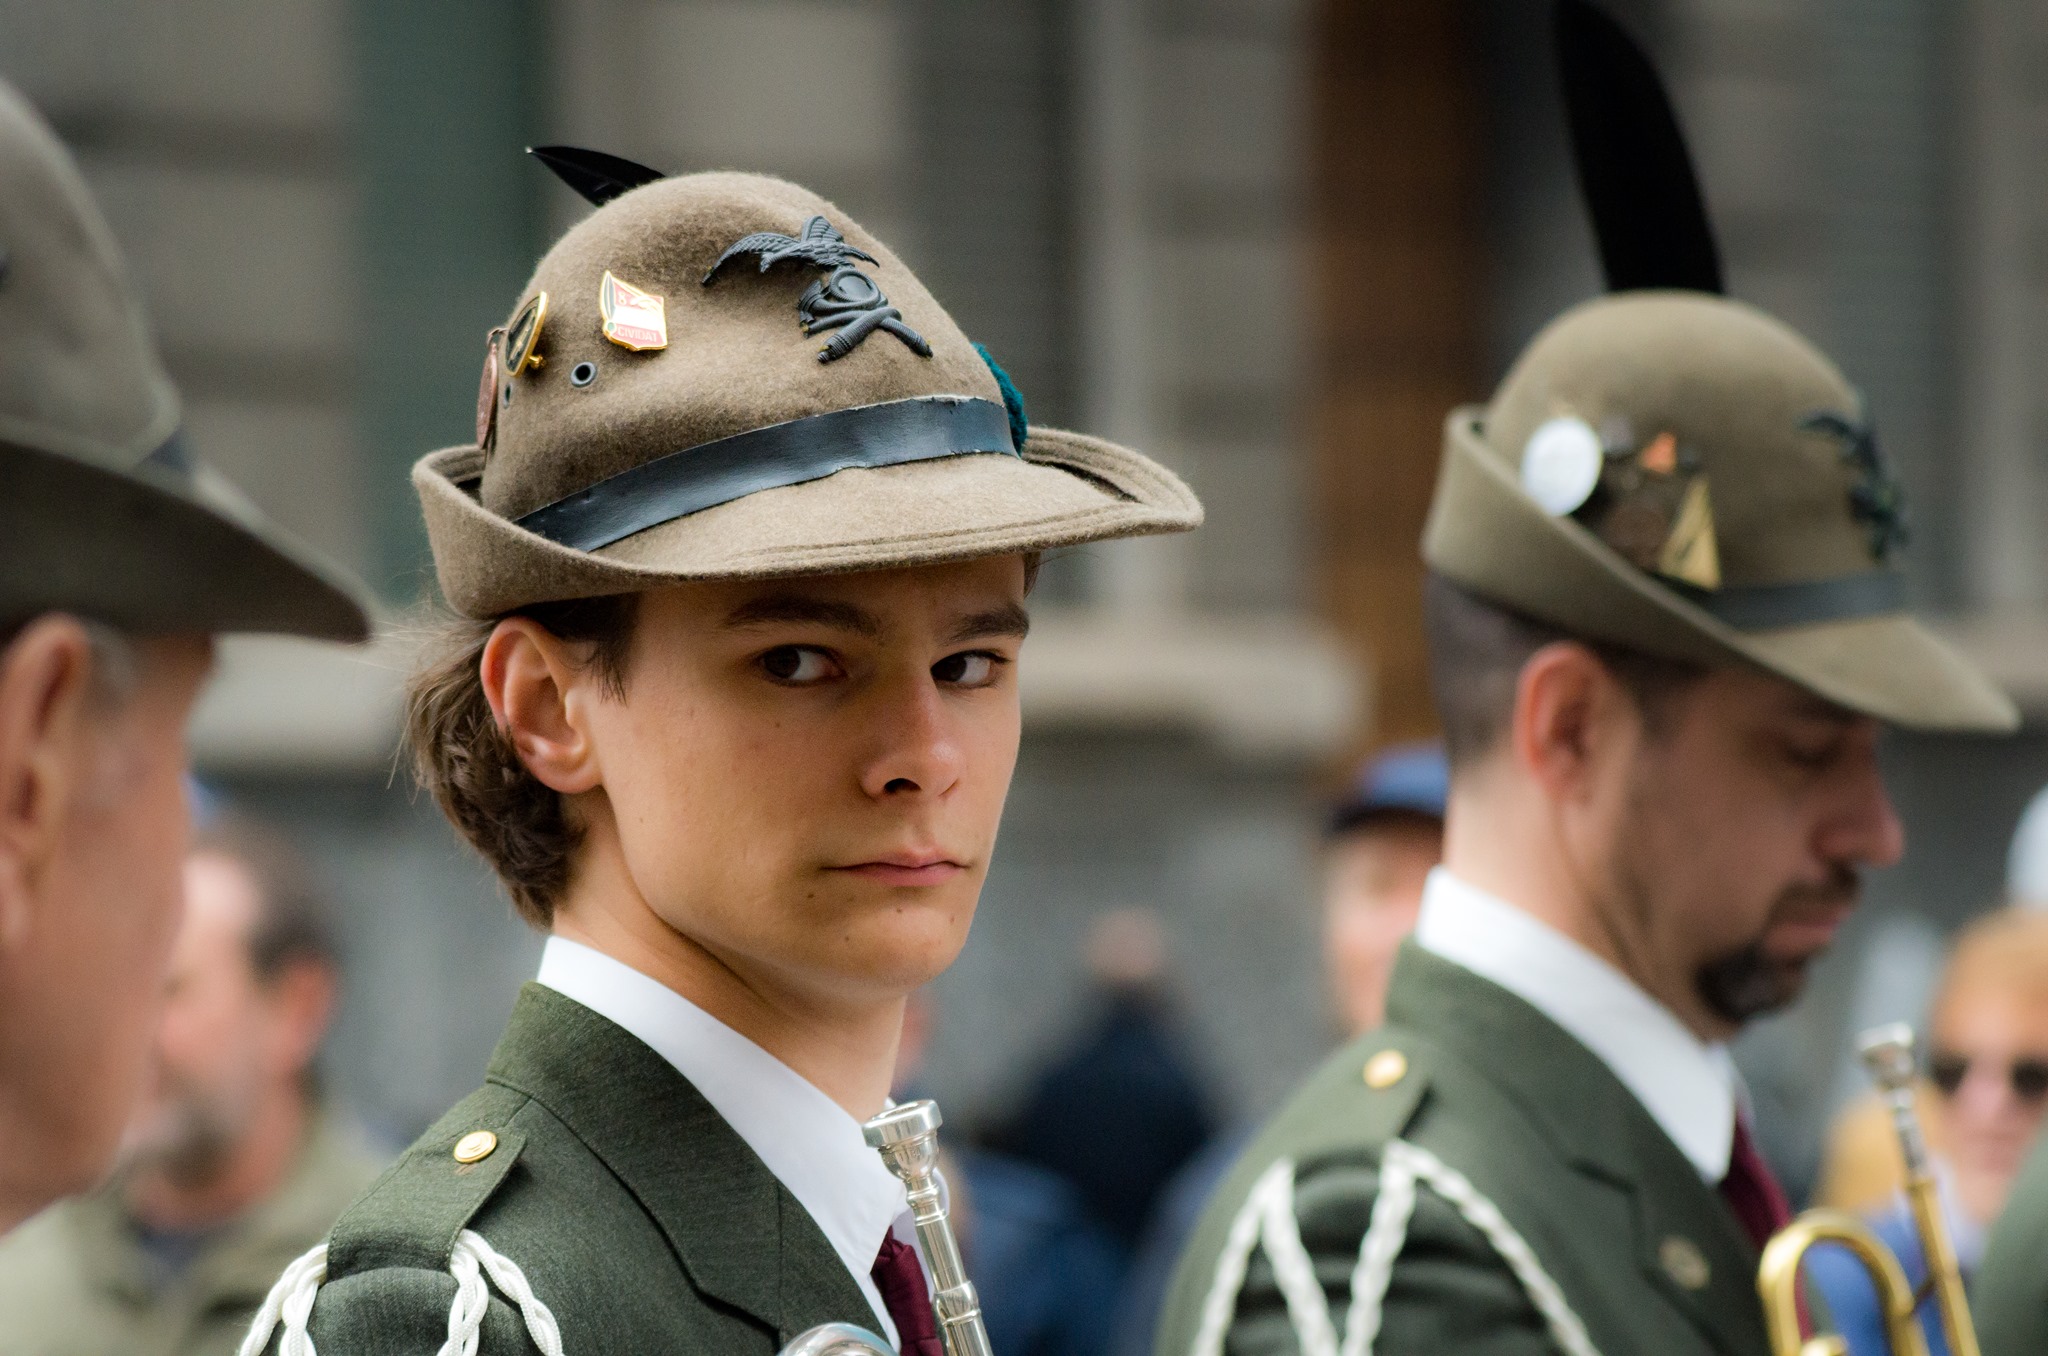 Gathering of the centenary of the Alpini...